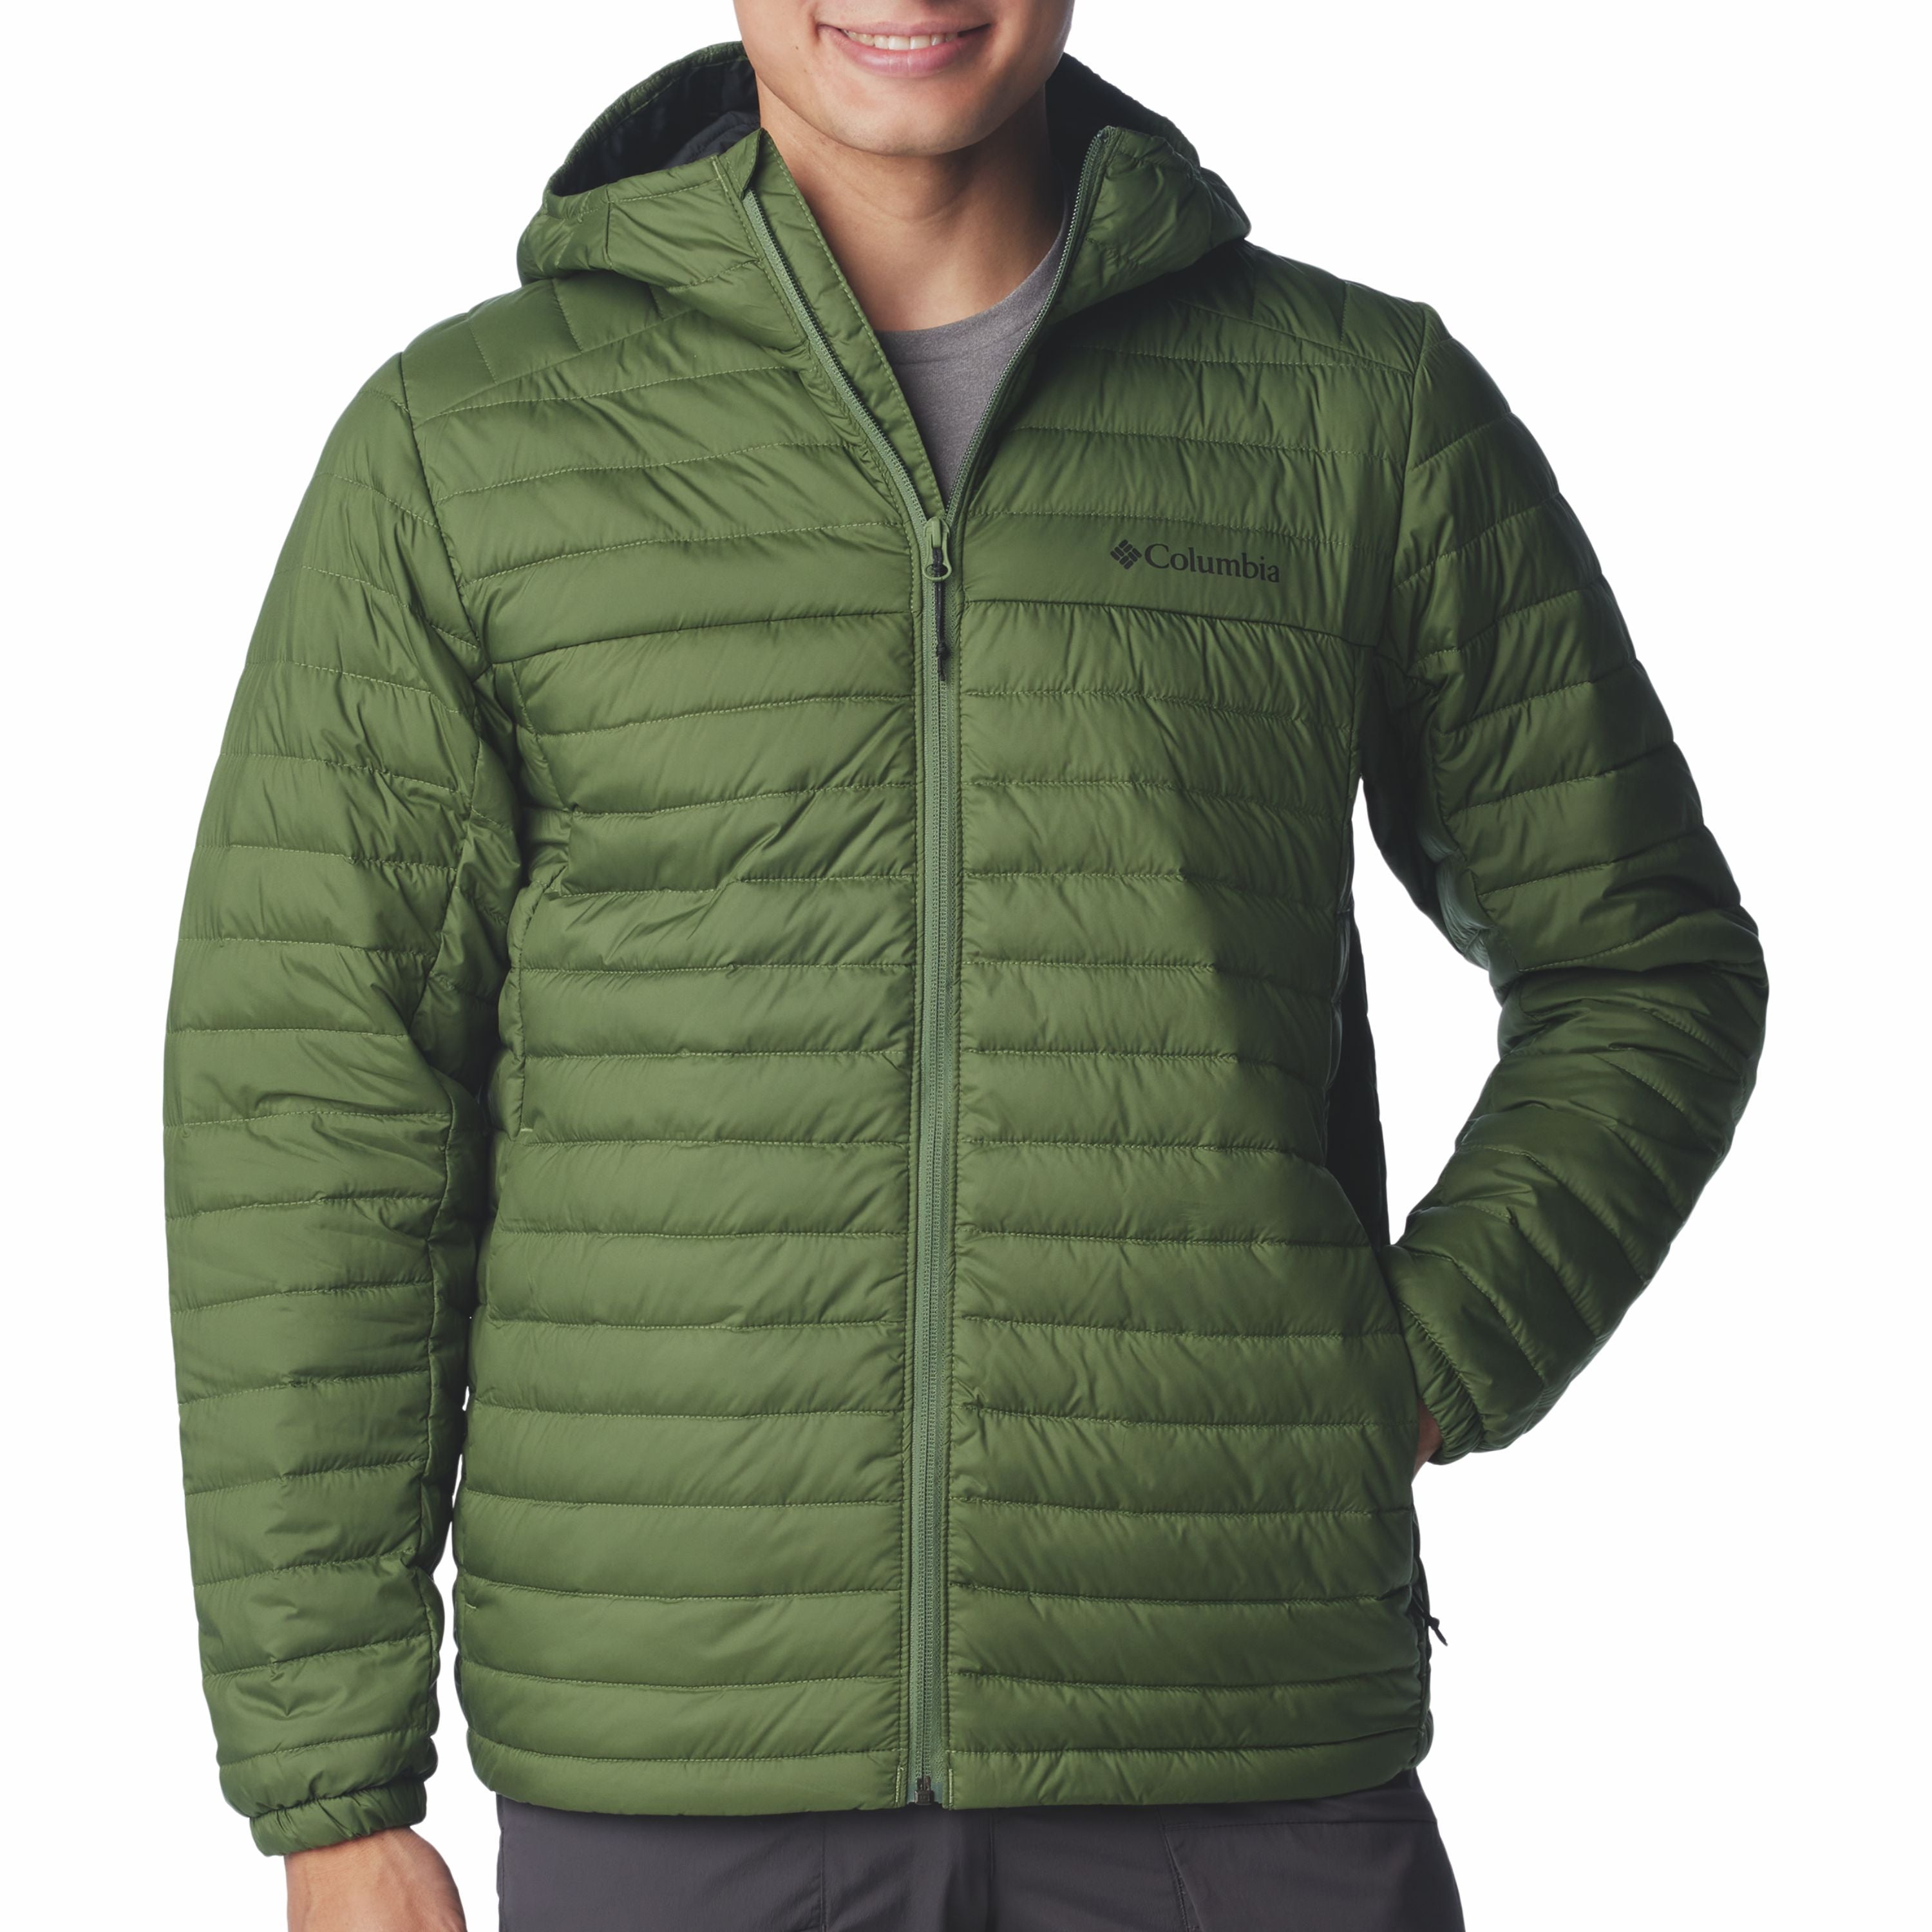 "Silver Falls" insulated hooded jacket - Men's